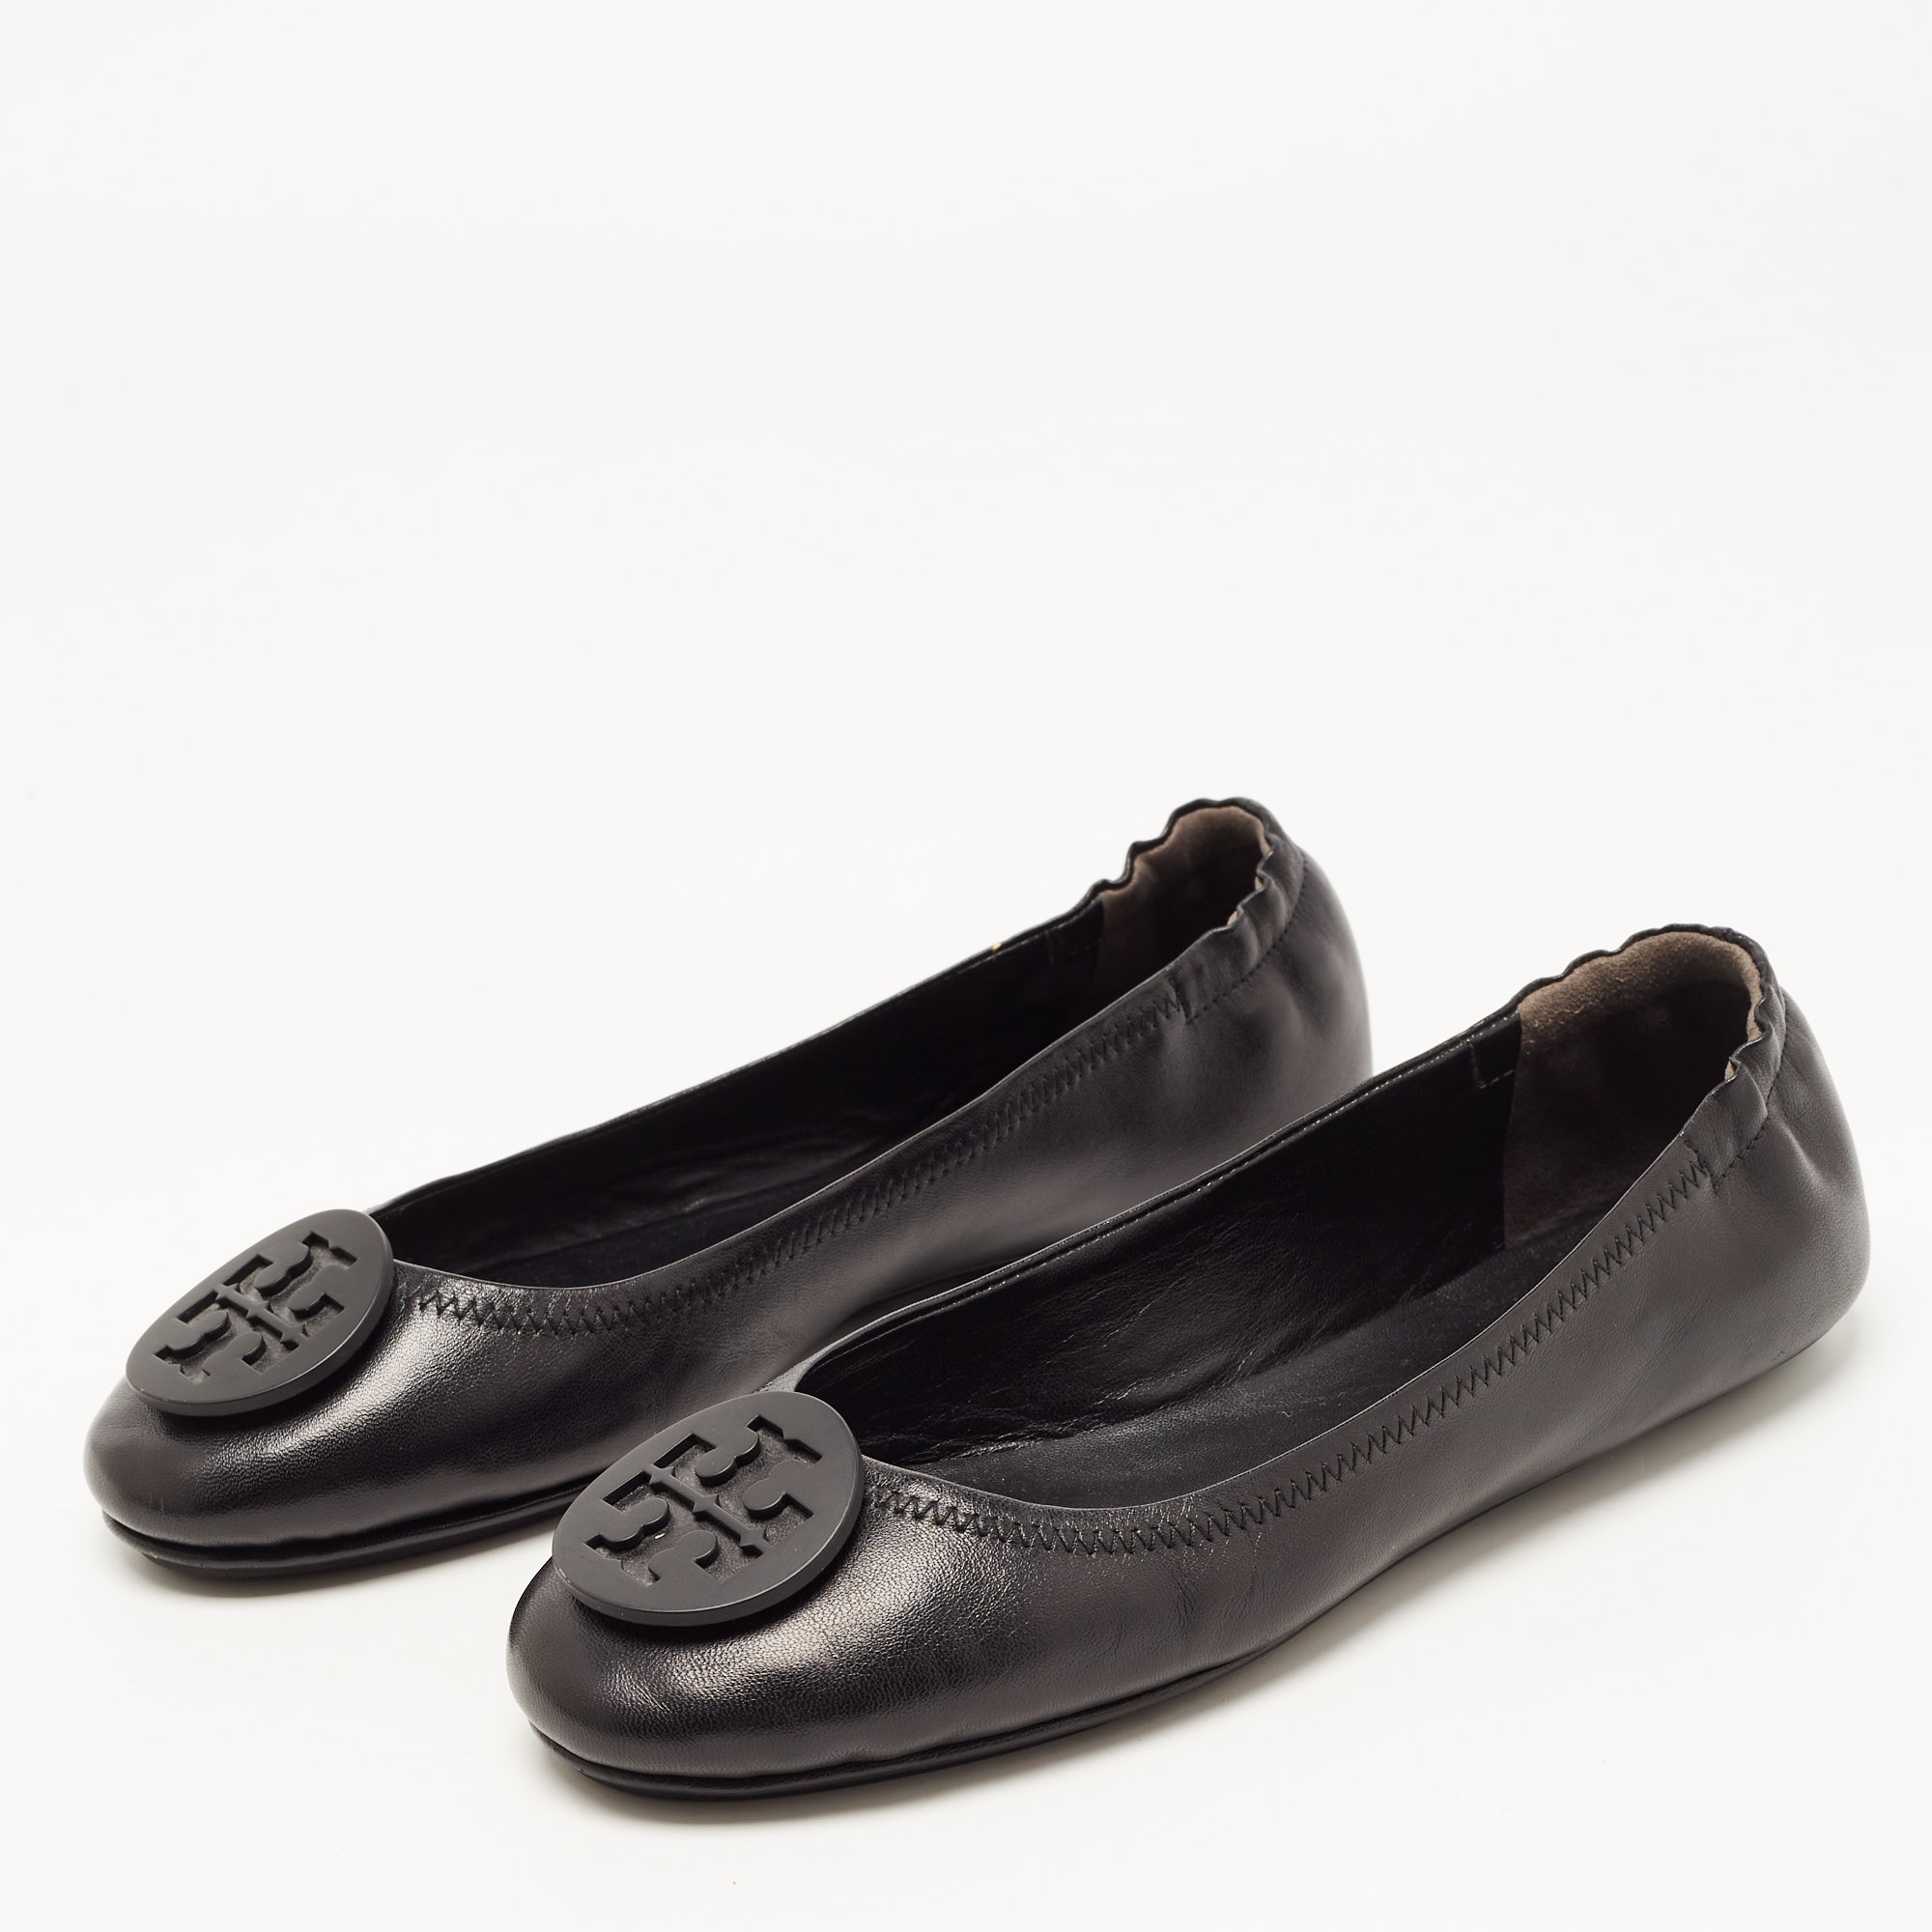 

Tory Burch Navy Blue/Beige Leather and Woven Fabric Reva Ballet Flats Size, Black